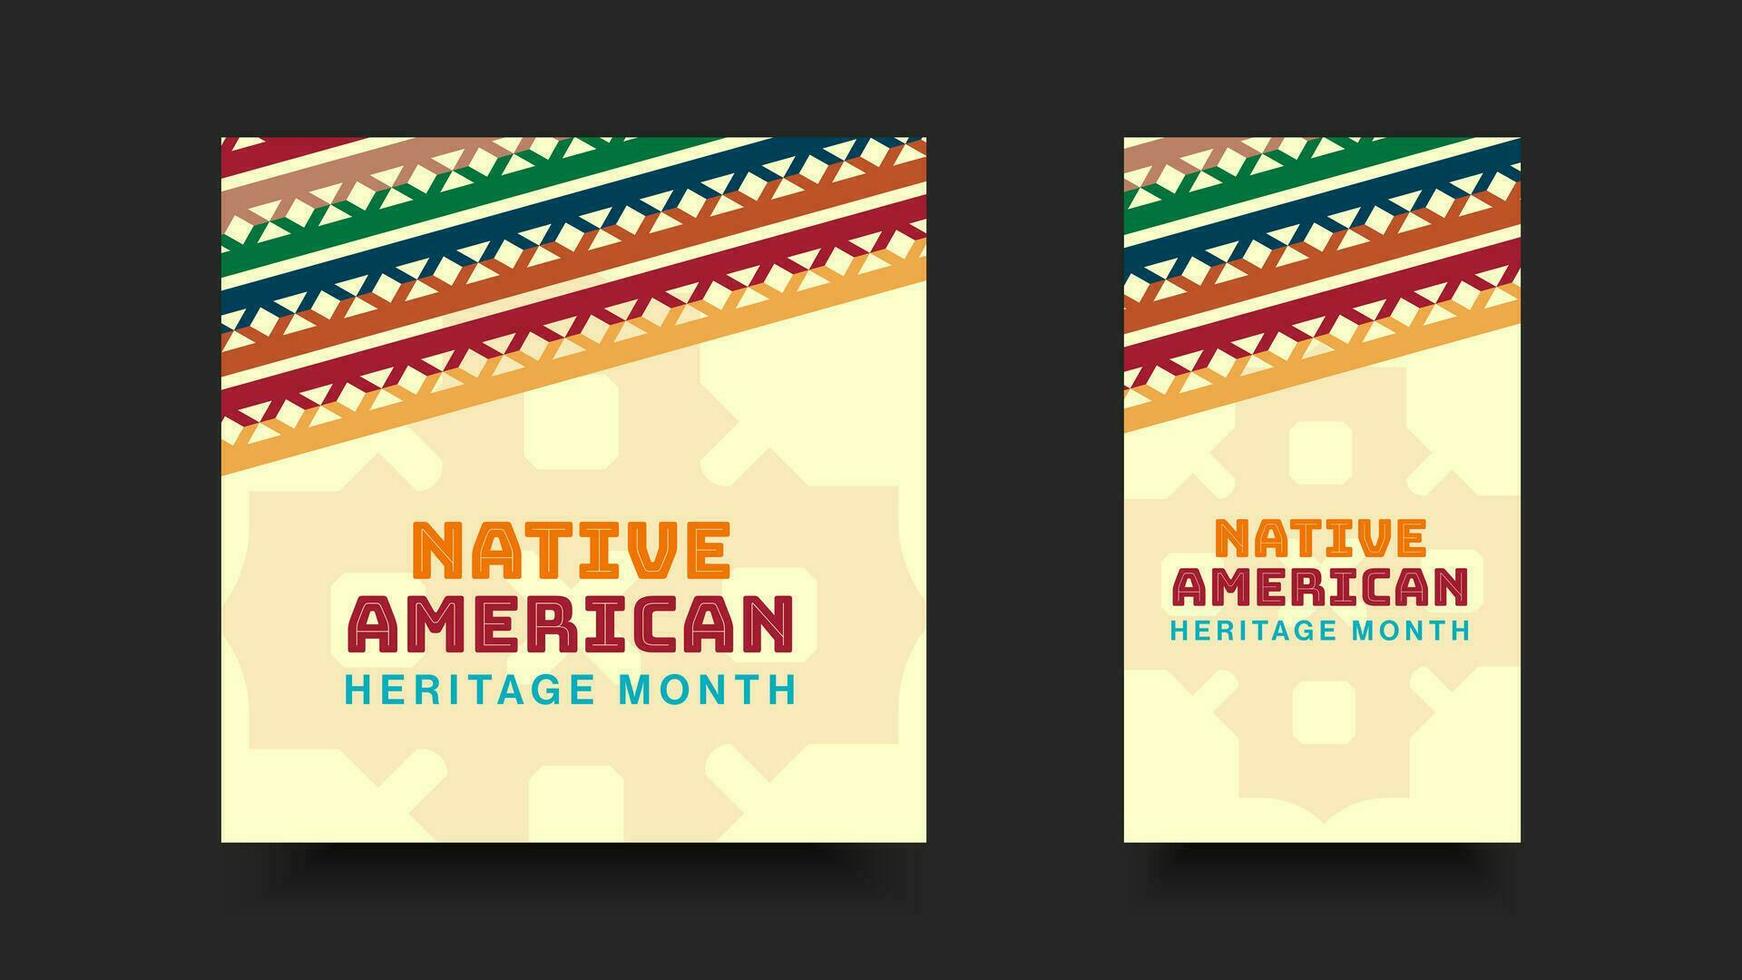 Native American Heritage Month. Background design with abstract ornaments celebrating Native Indians in America. vector